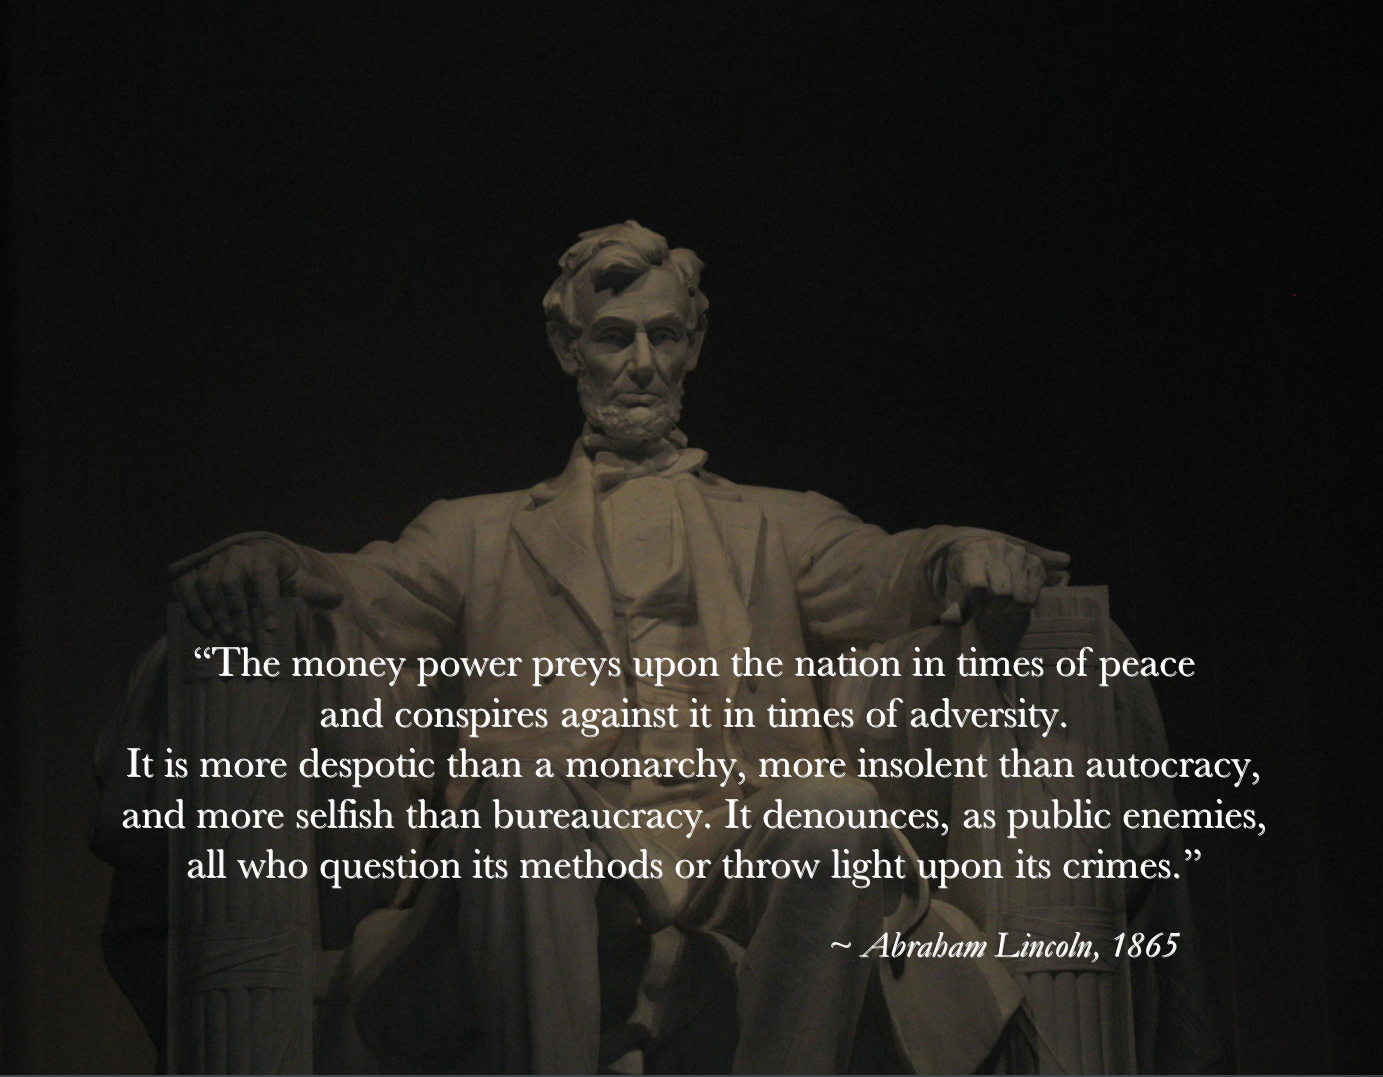 Lincoln on The Money Power